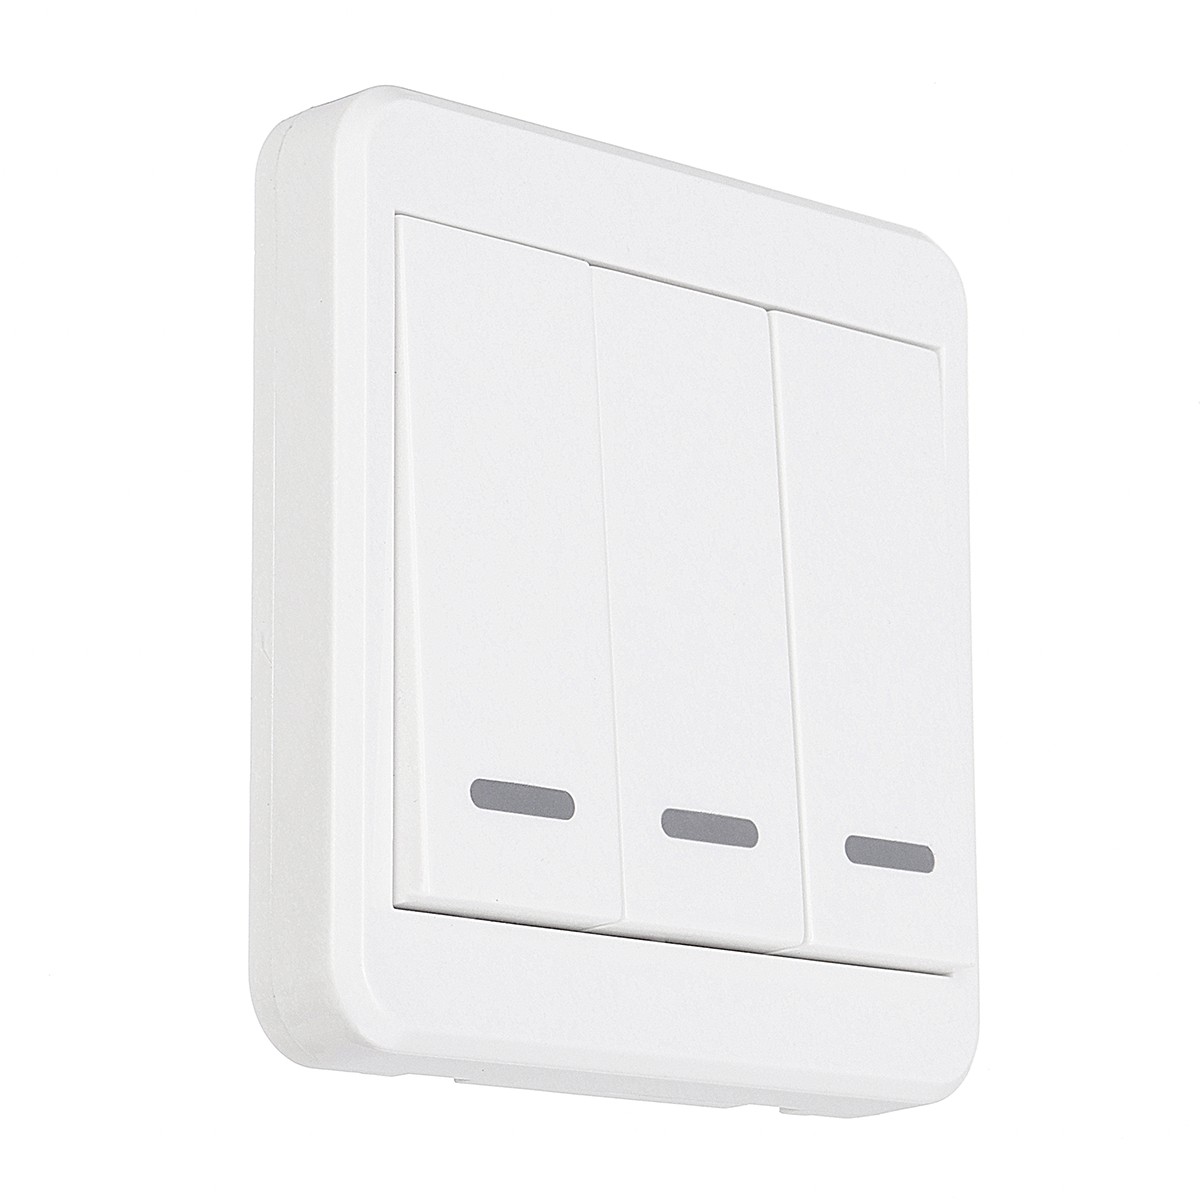 123-Way-Push-Button-Switch-Remote-Control-Switch-86-Wall-Panel-315MHz-Wireless-1334553-8